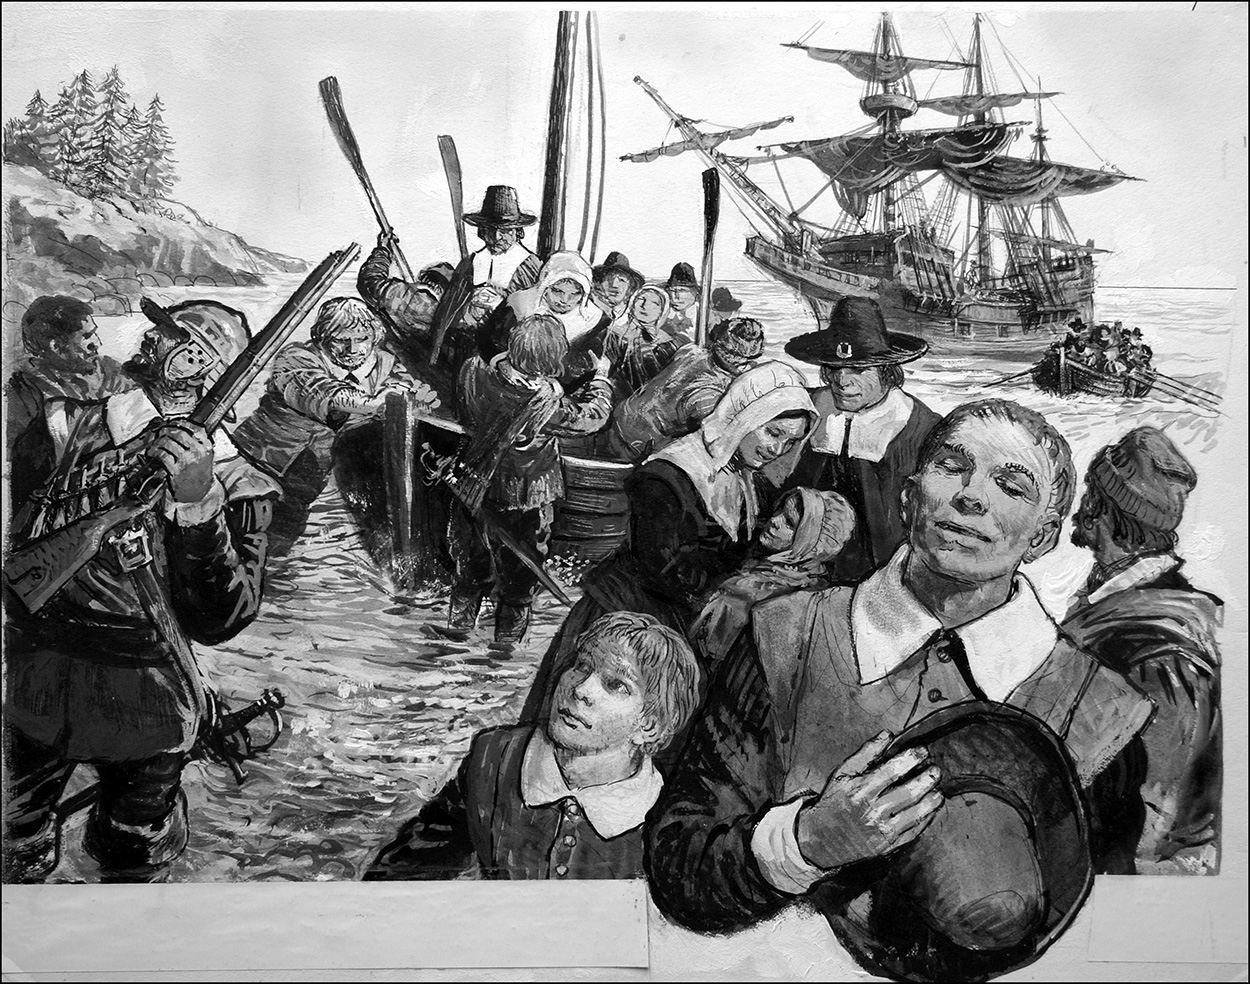 Arrival of the Mayflower (Original) art by Ken Petts at The Illustration Art Gallery